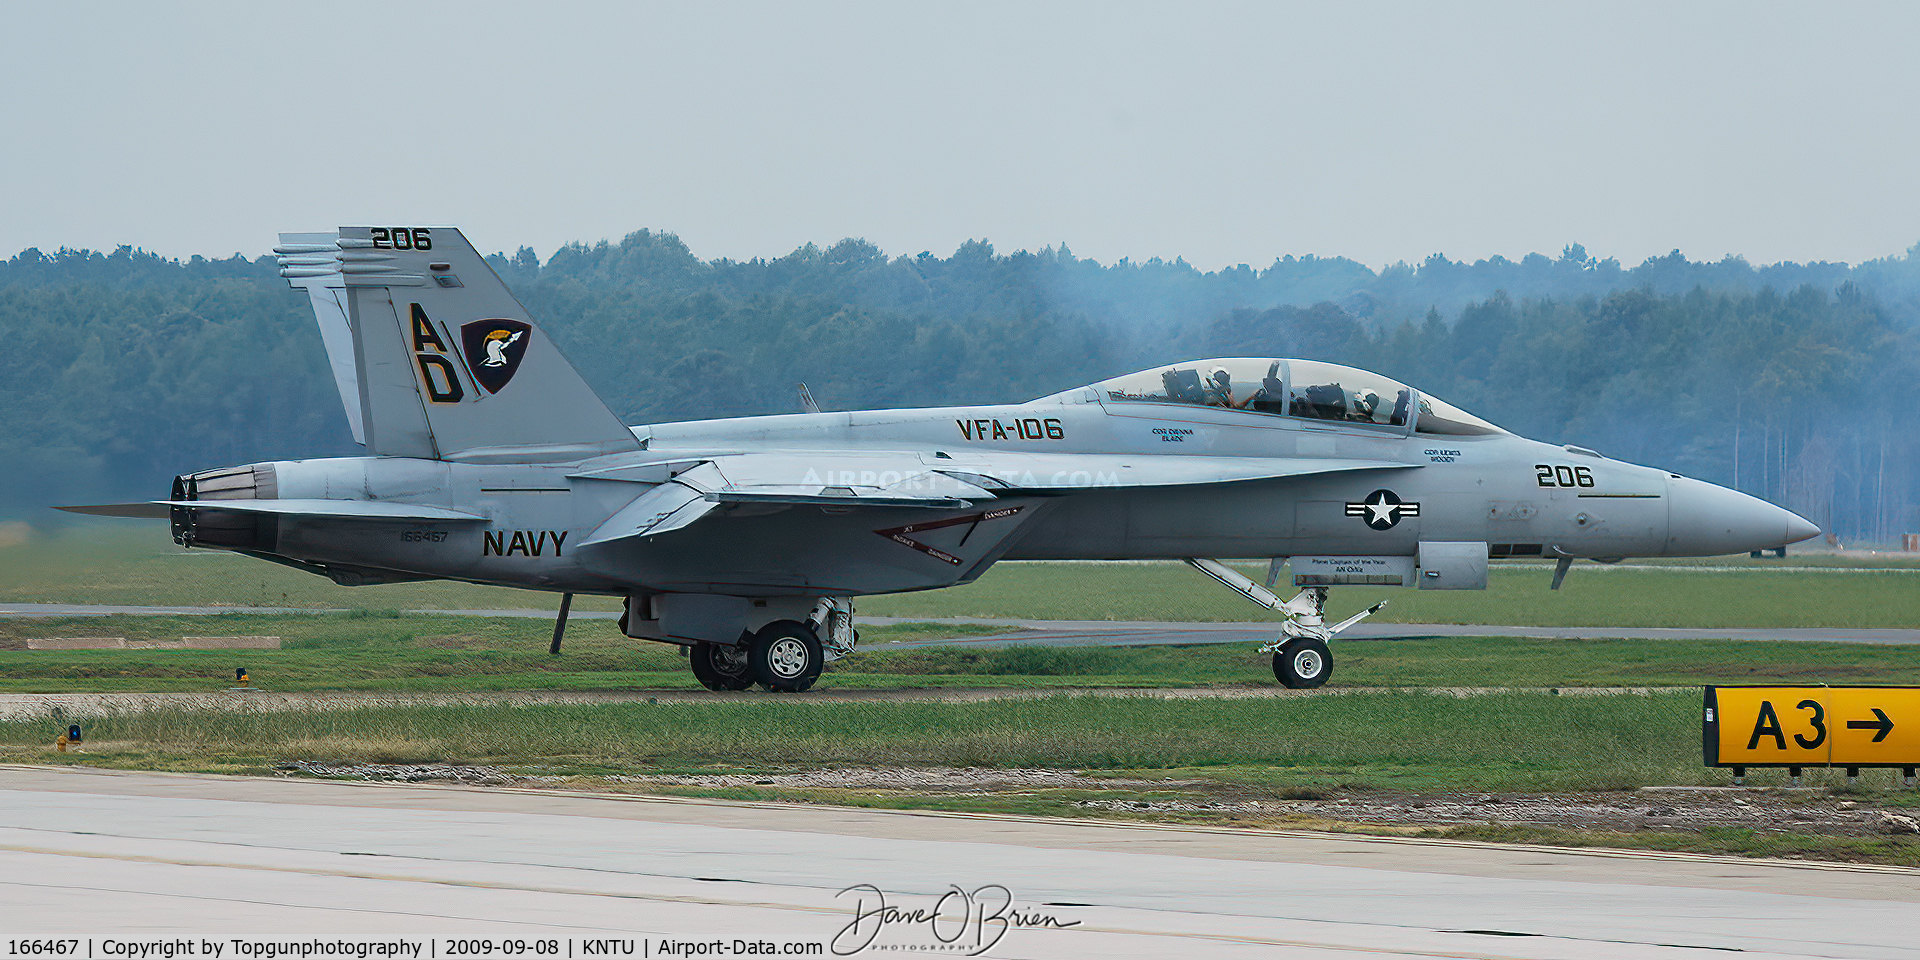 166467, Boeing F/A-18F Super Hornet C/N F102, Naval Fleet F model SH taxiing out from the ramp.